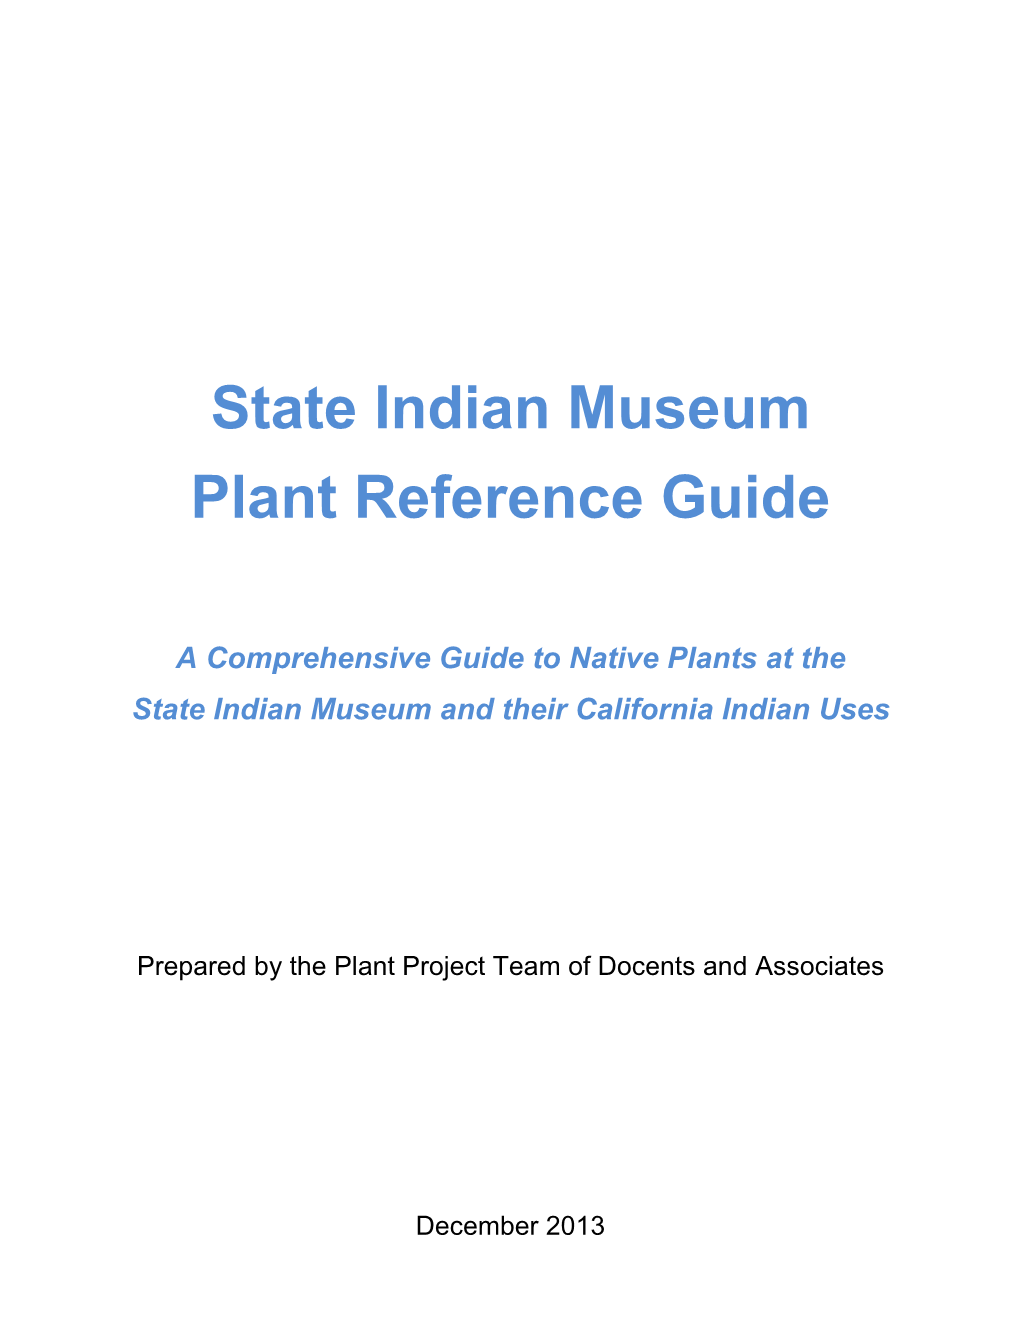 State Indian Museum Plant Reference Guide